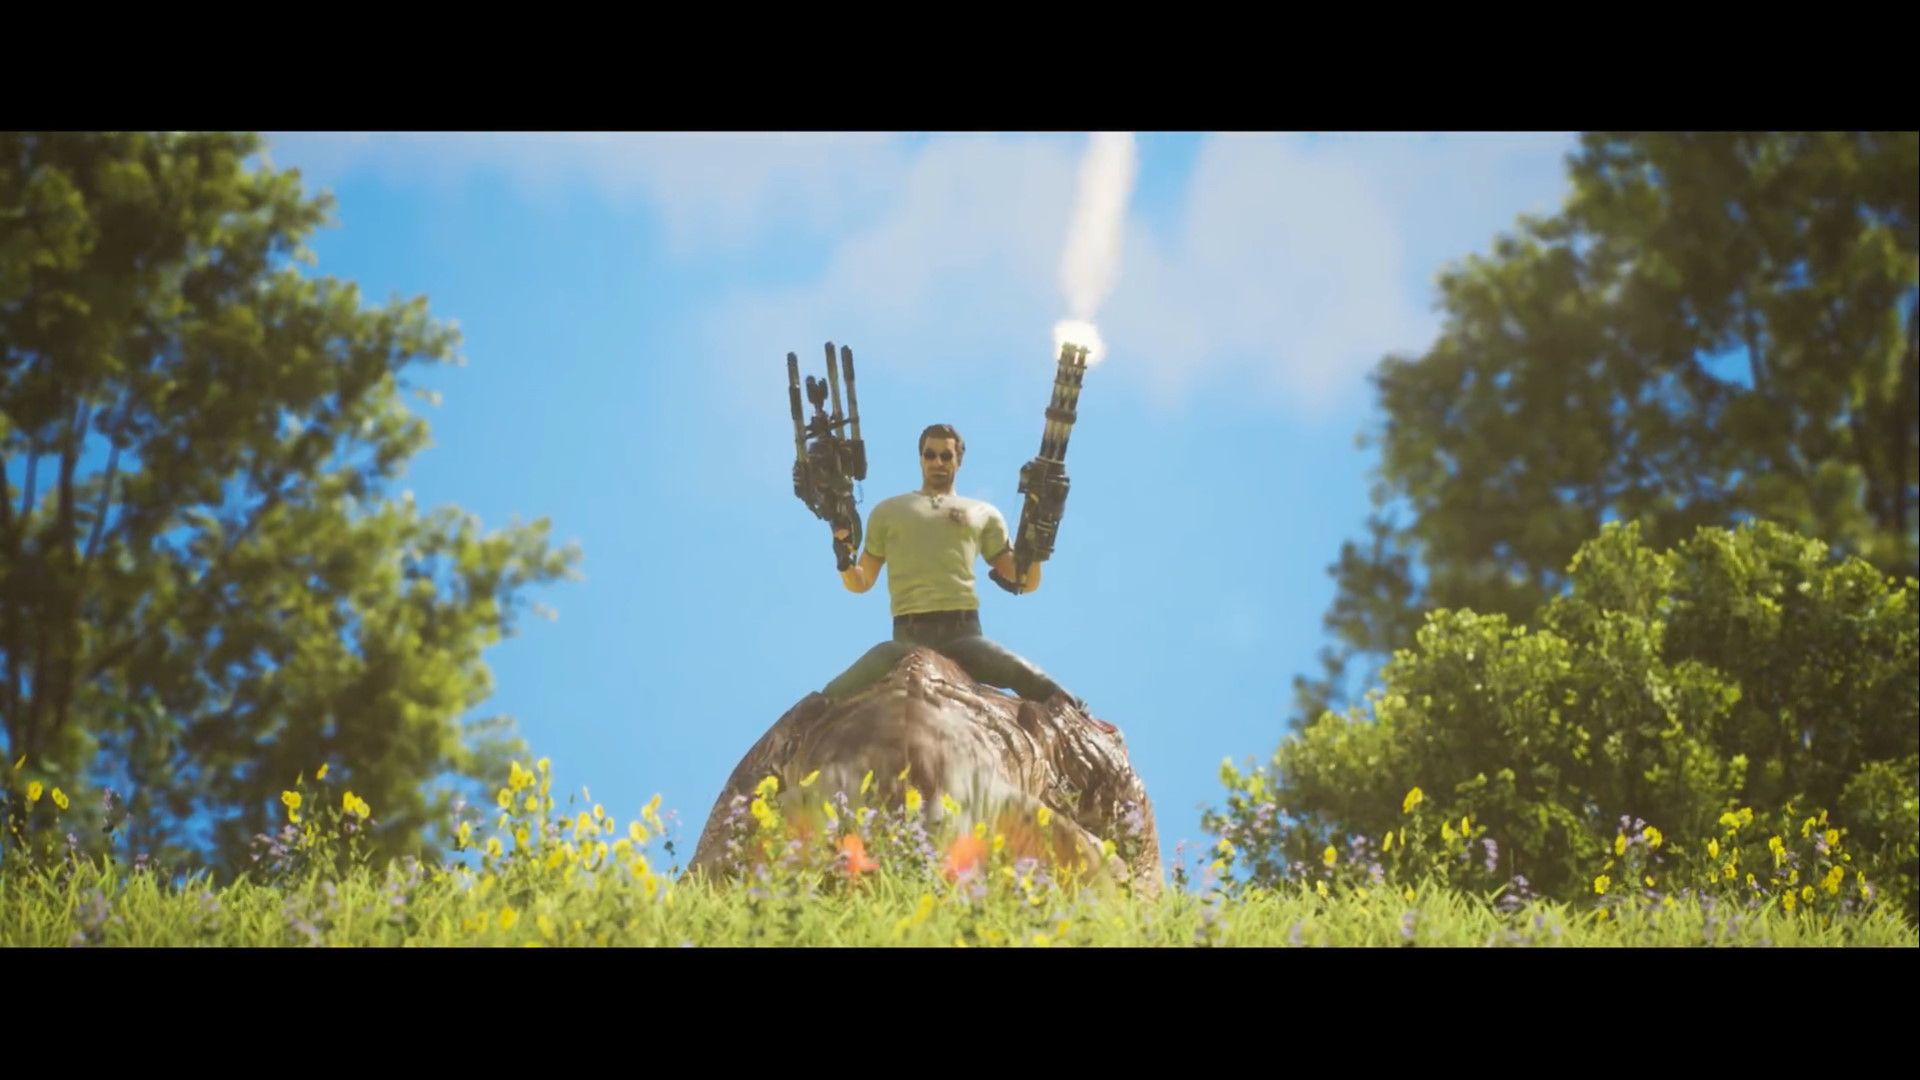 A classic returns with Serious Sam 4 launching in August 2020 on Stadia and PC